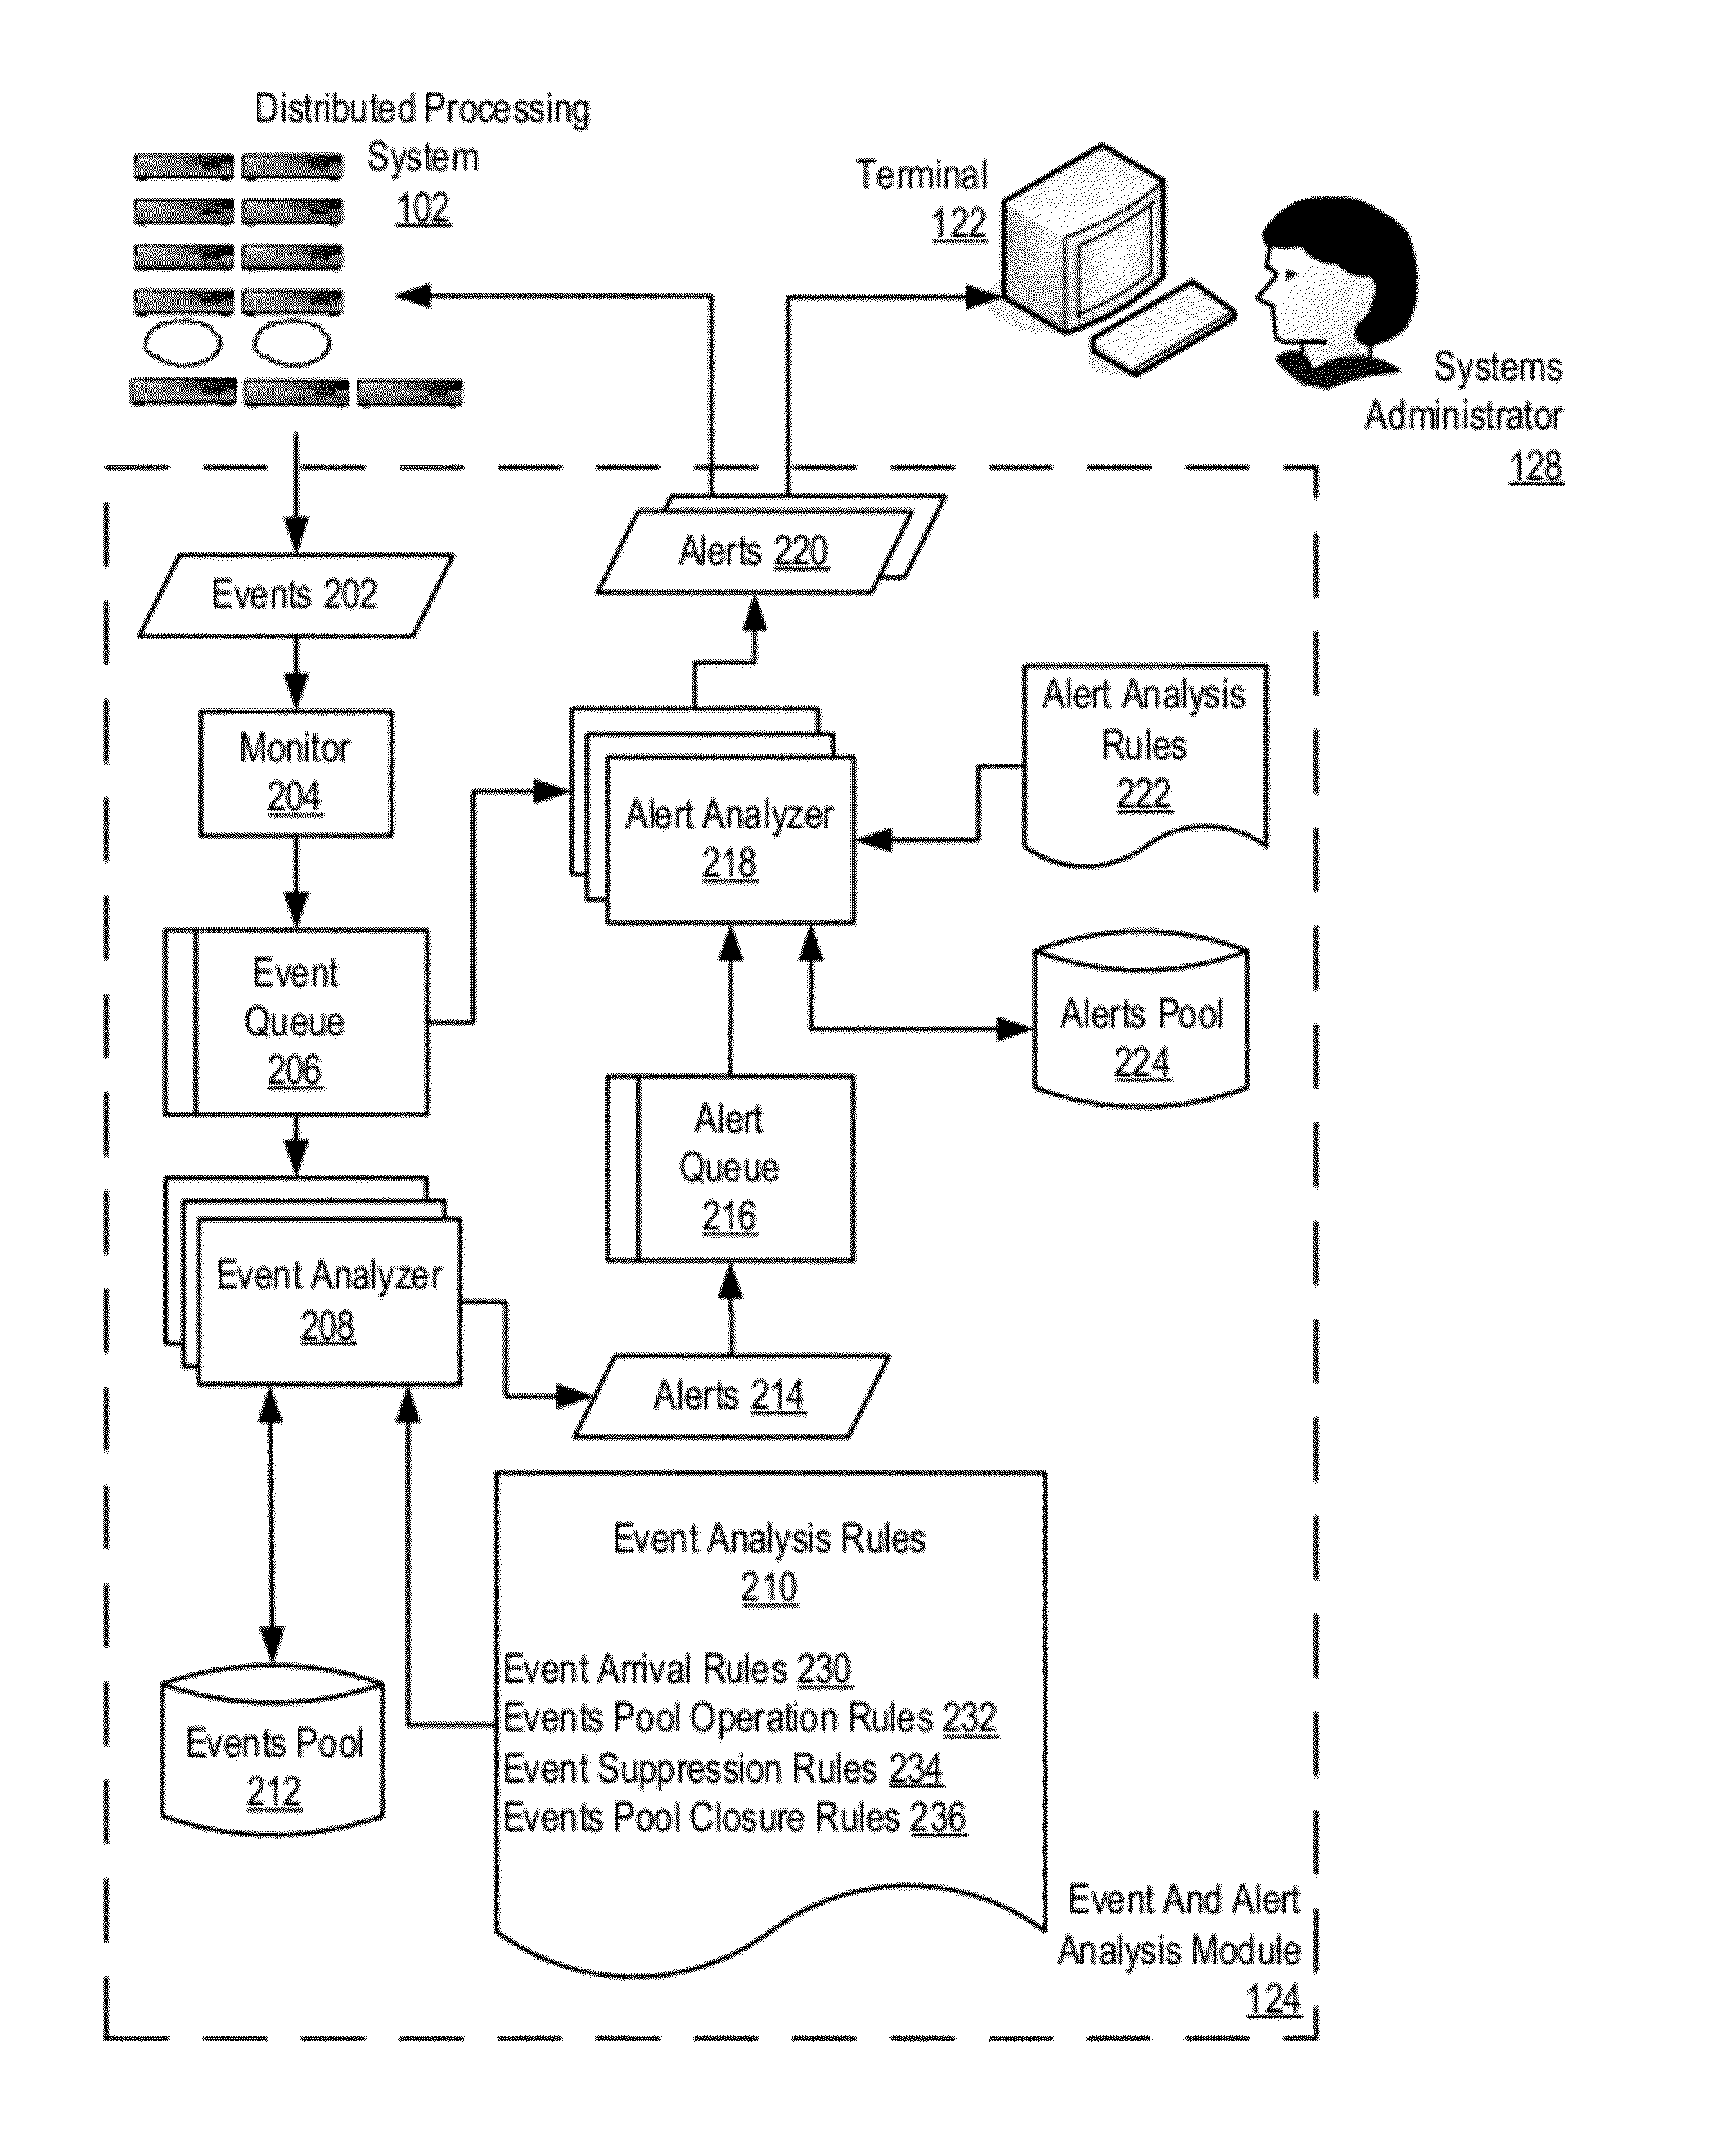 Event Management In A Distributed Processing System